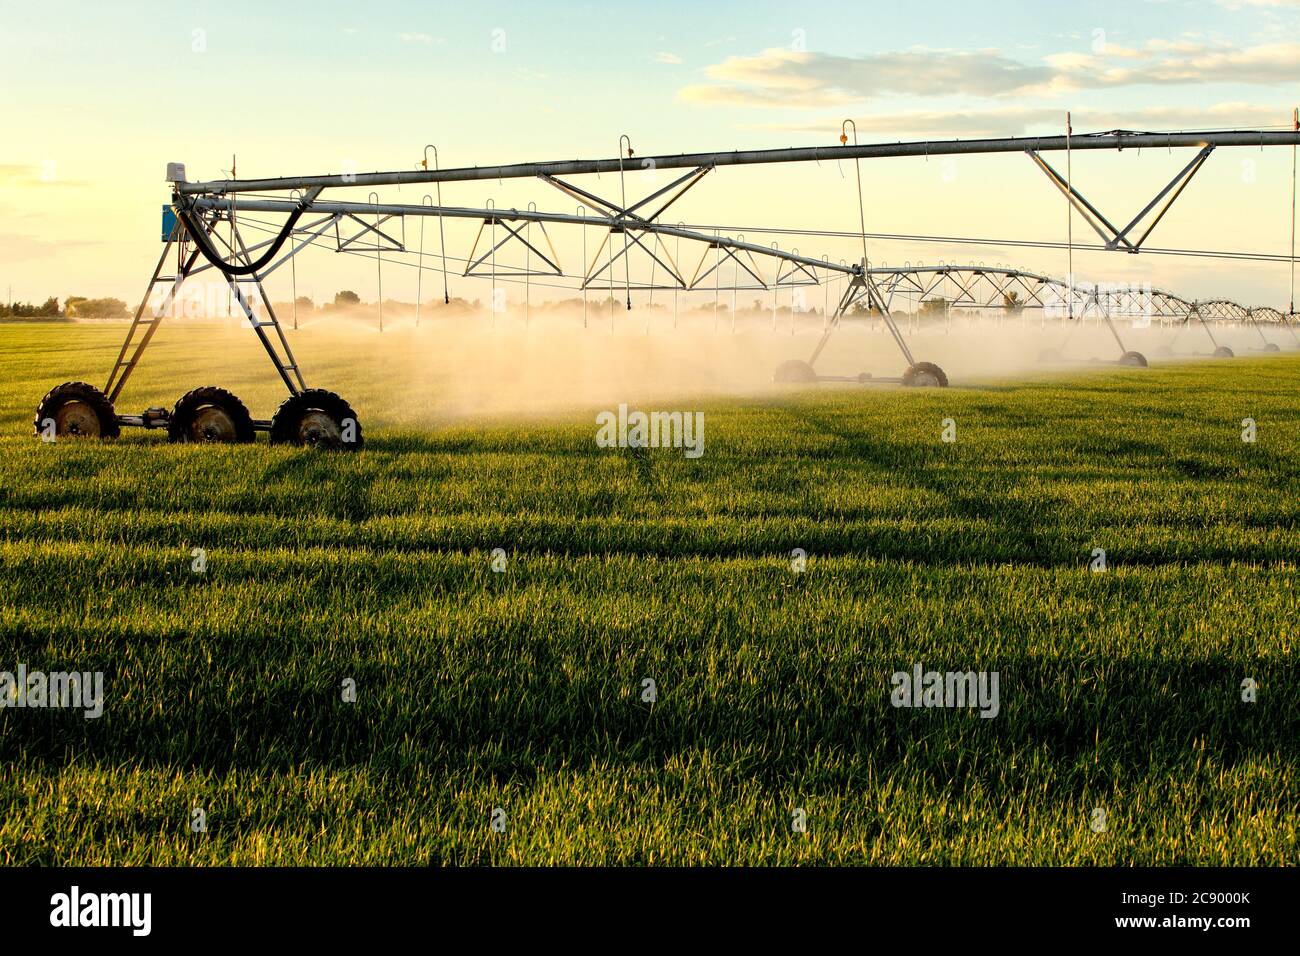 A center pivot sprinkler prepared for a new season watering a wheat field. Stock Photo